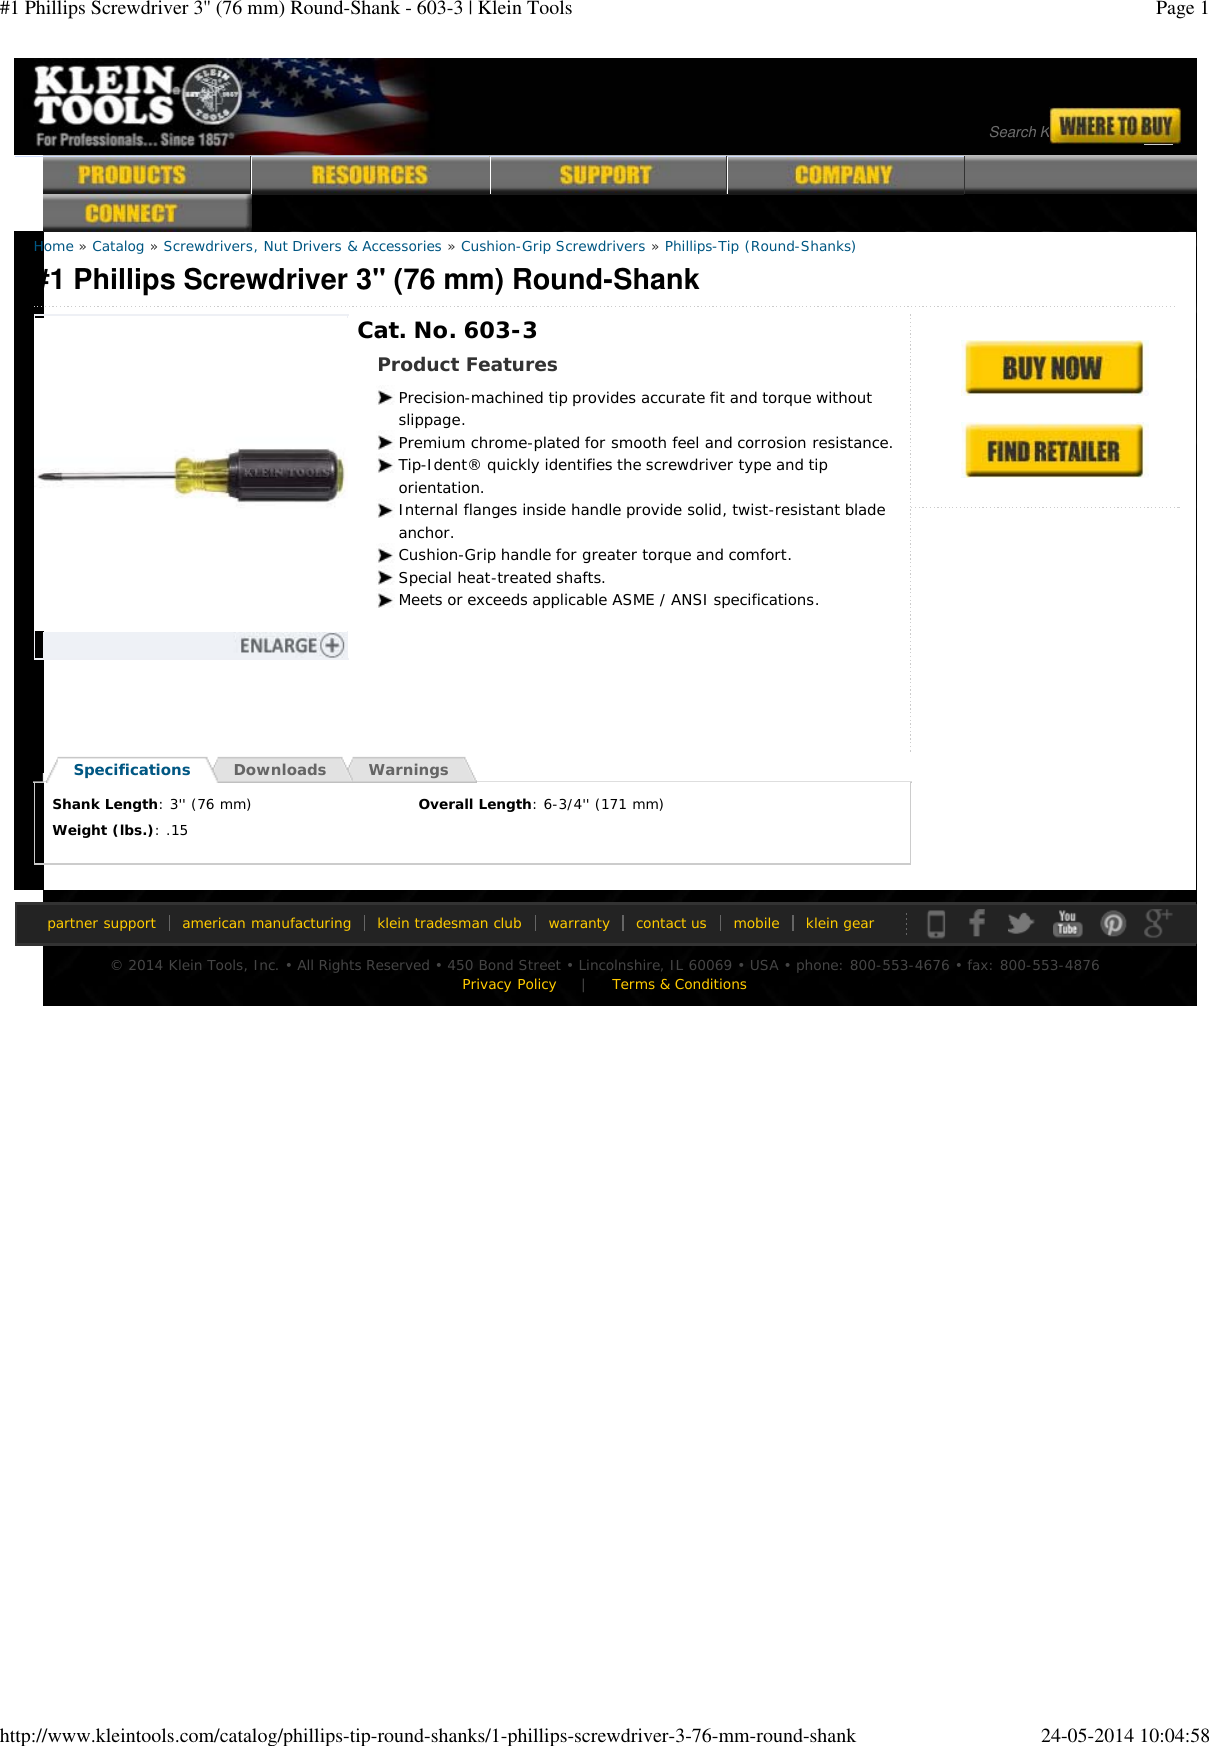 Page 1 of 1 - #1 Phillips Screwdriver 3'' (76 Mm) Round-Shank - 603-3 | Klein Tools